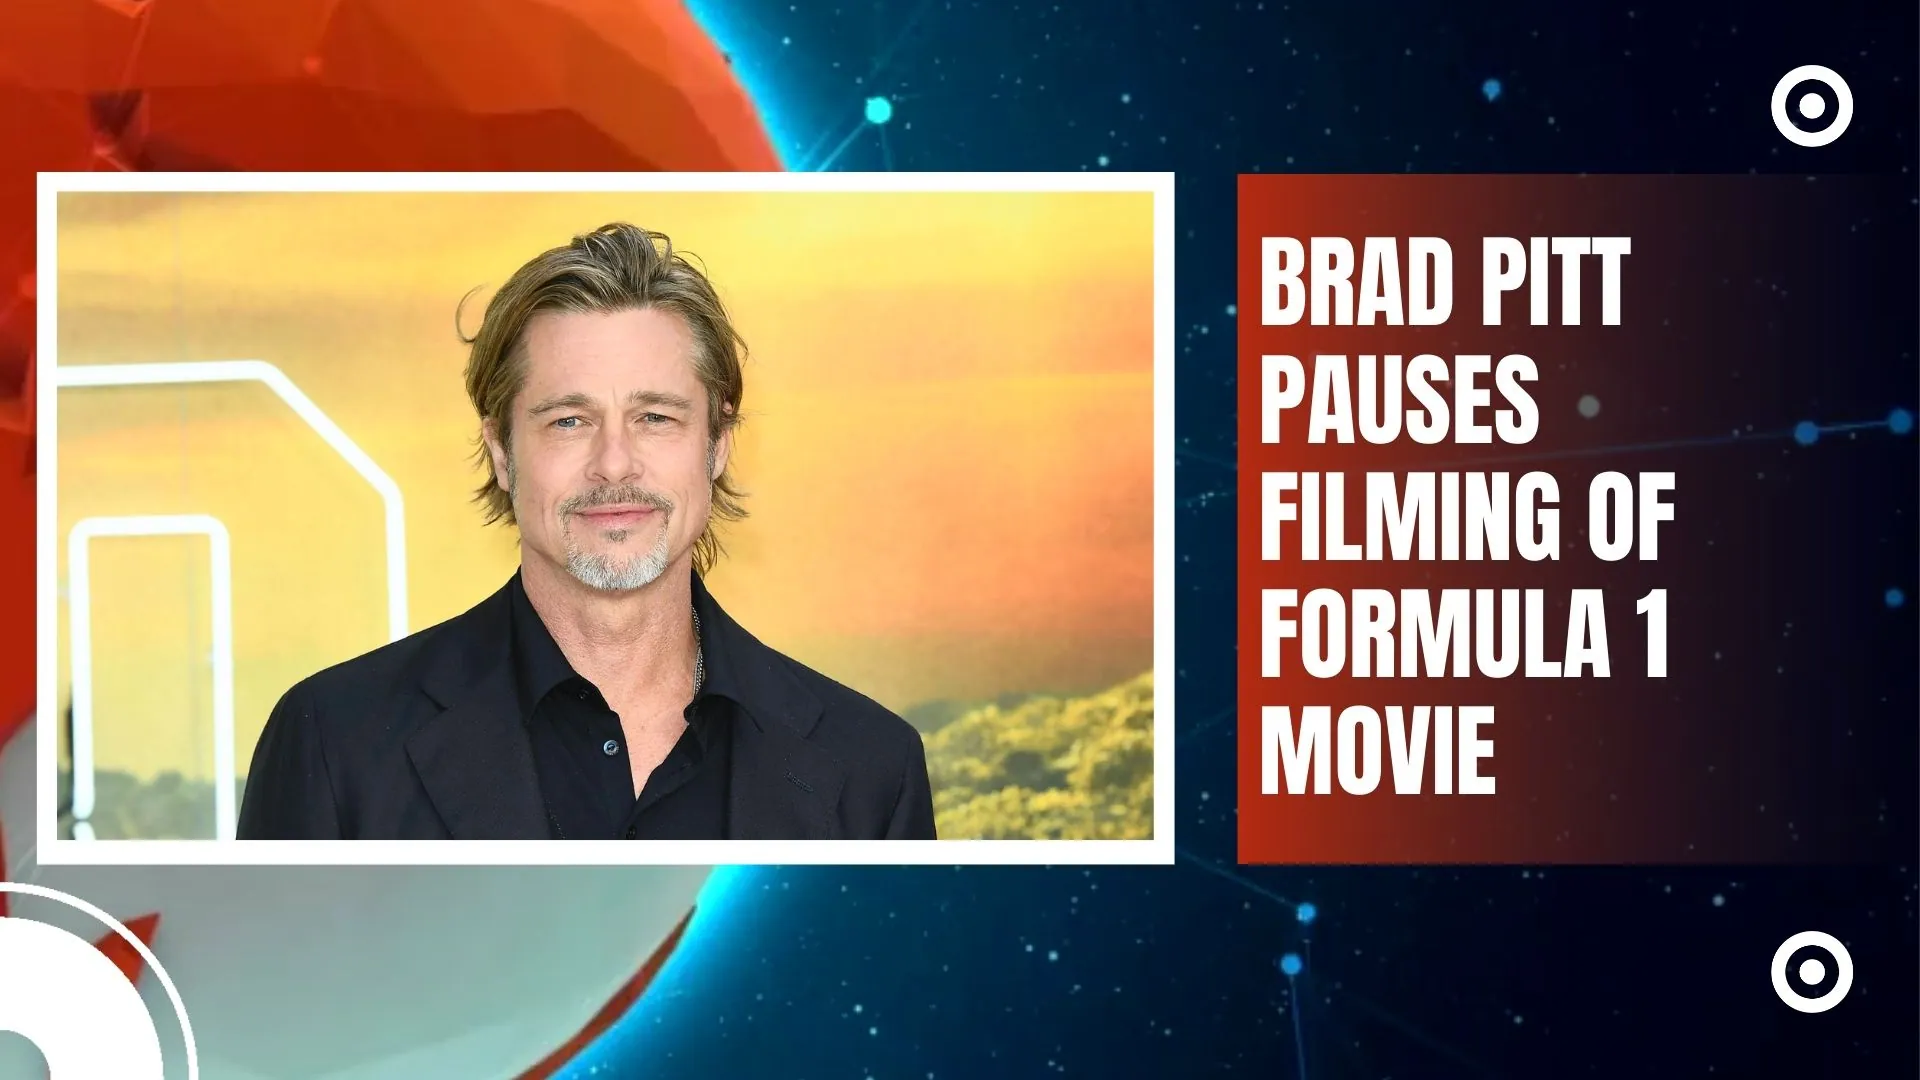 Brad Pitt Pauses Filming of Formula 1 Movie to Support Hollywood Strikes